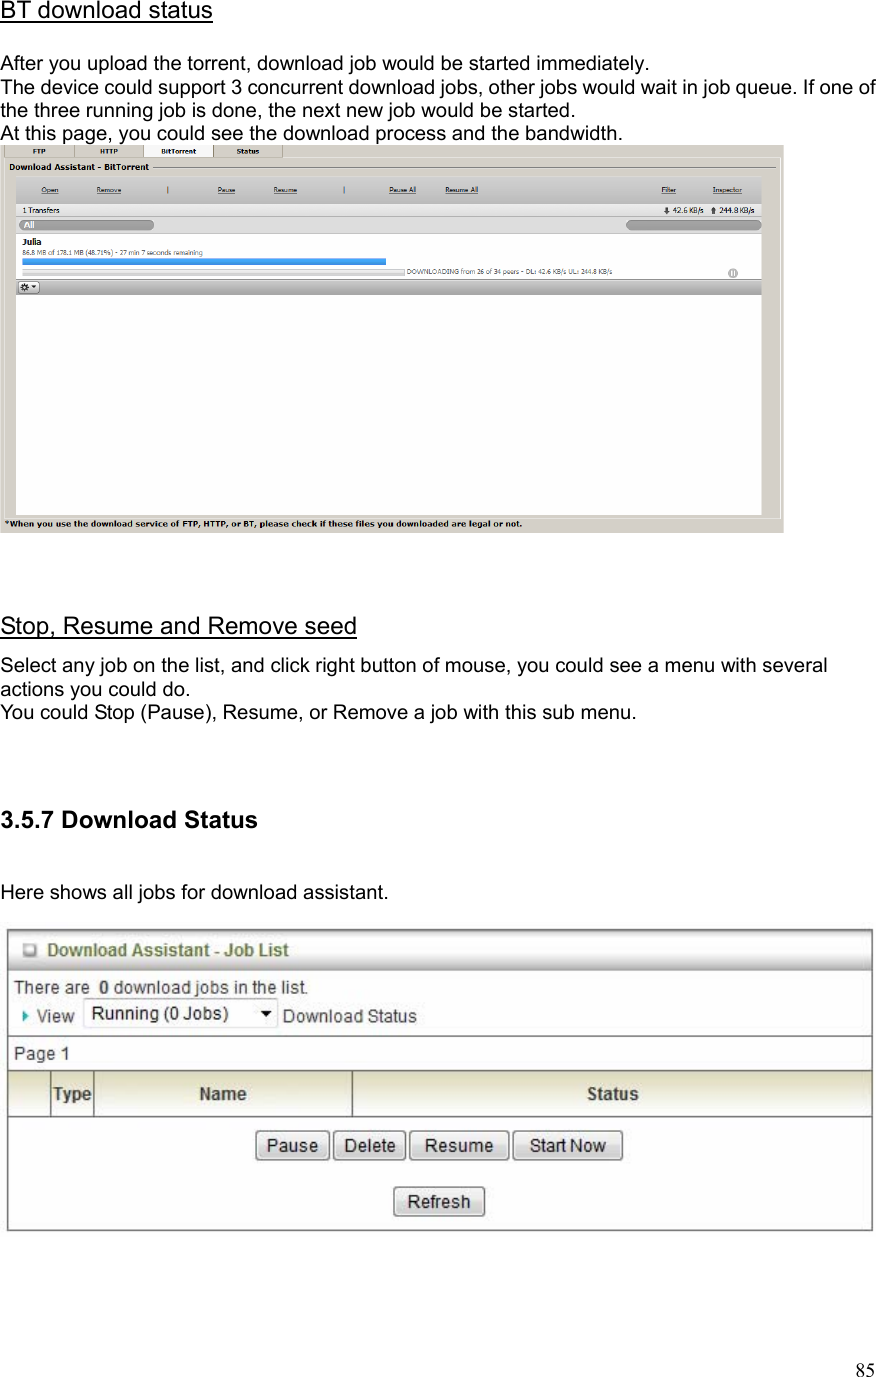  85BT download status  After you upload the torrent, download job would be started immediately. The device could support 3 concurrent download jobs, other jobs would wait in job queue. If one of the three running job is done, the next new job would be started. At this page, you could see the download process and the bandwidth.    Stop, Resume and Remove seed Select any job on the list, and click right button of mouse, you could see a menu with several actions you could do. You could Stop (Pause), Resume, or Remove a job with this sub menu.   3.5.7 Download Status  Here shows all jobs for download assistant.    